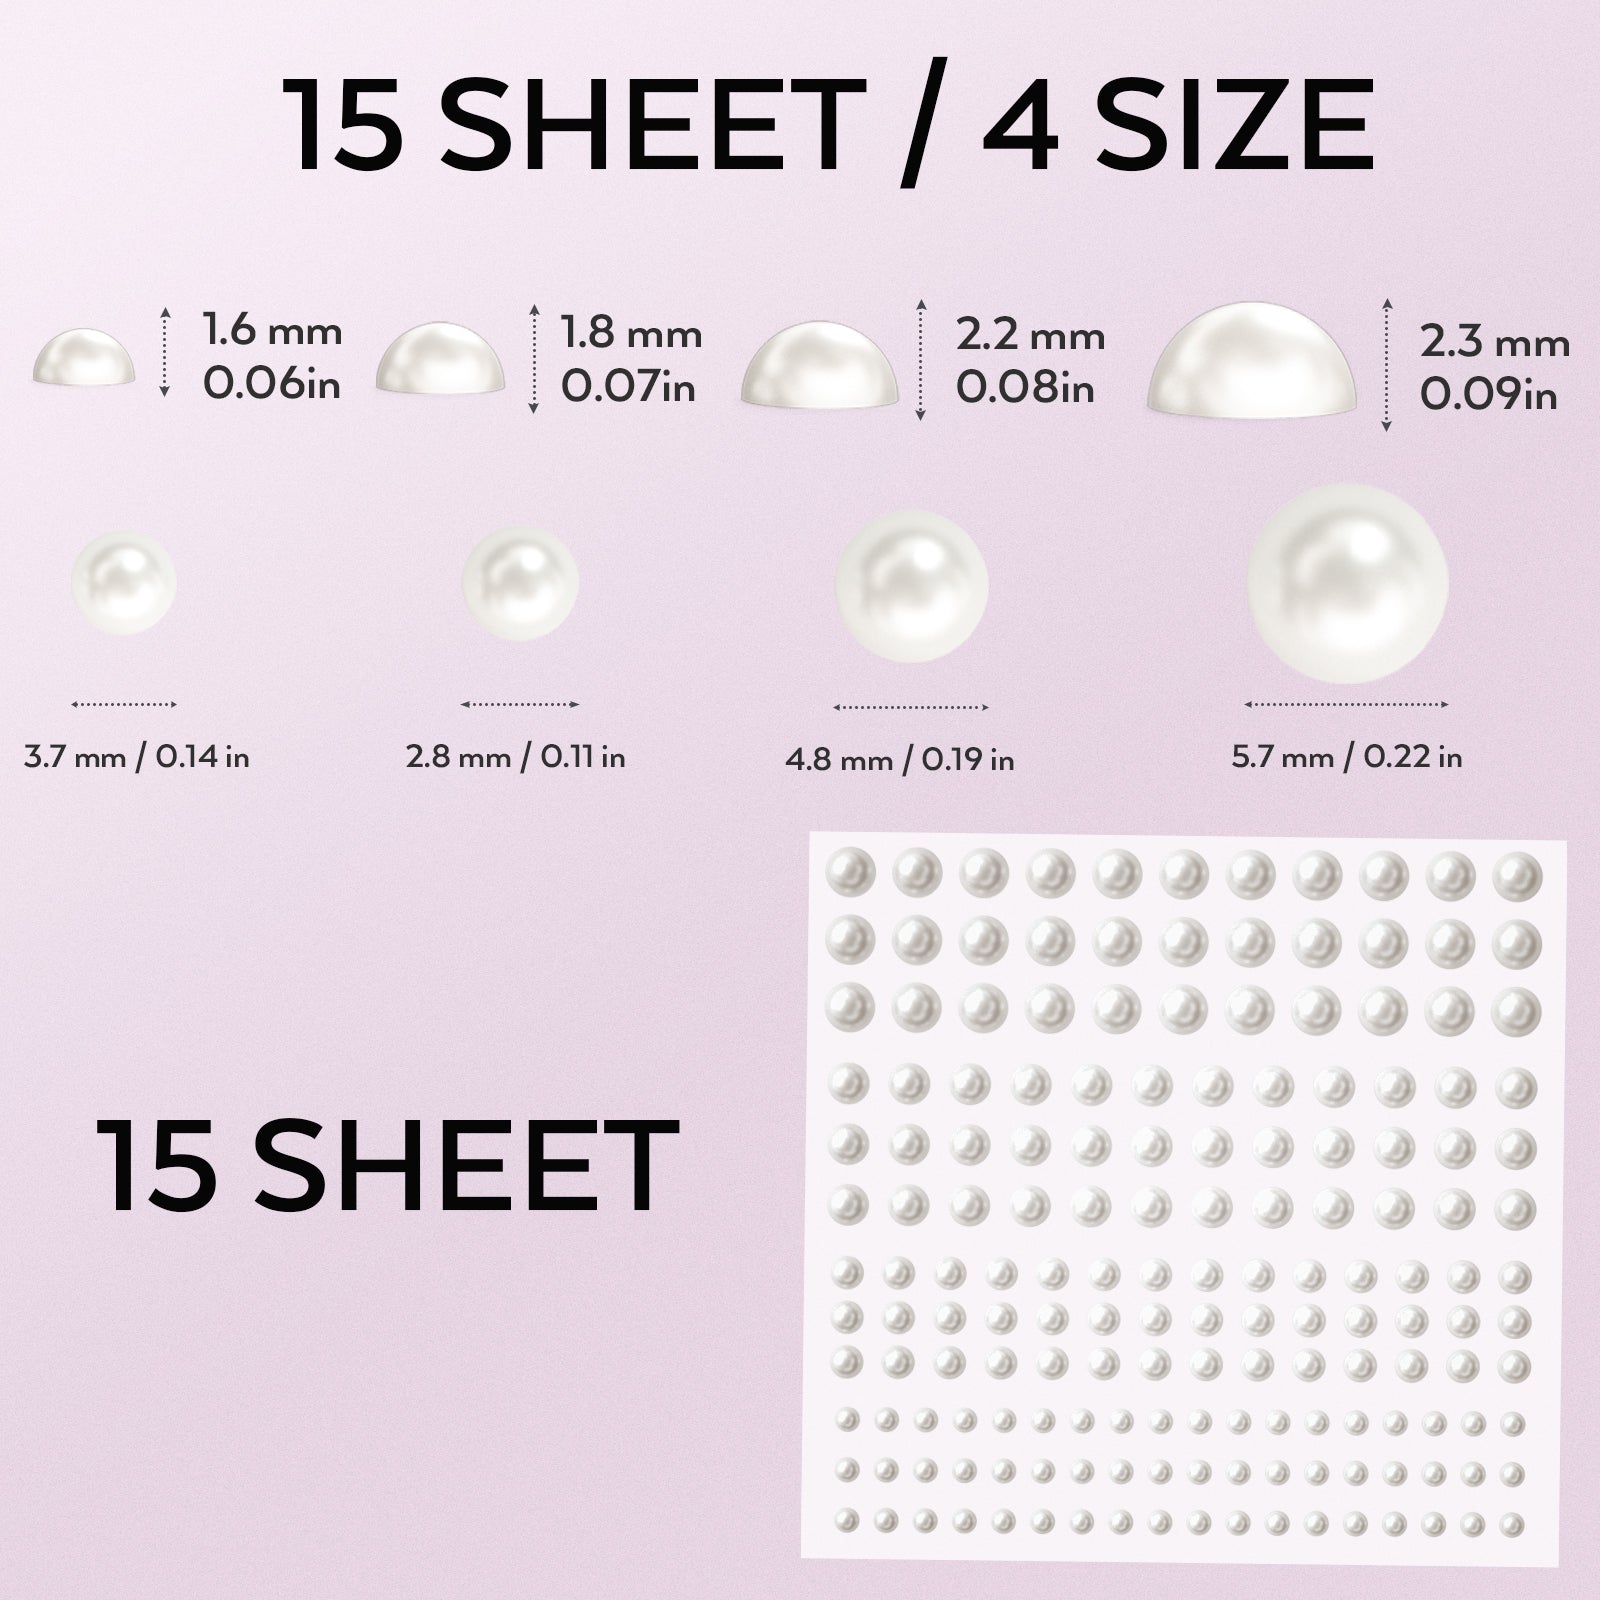 2475 PCS Pearl Stickers Self Adhesive, Nicpro 4 Size Stick On Makeup P